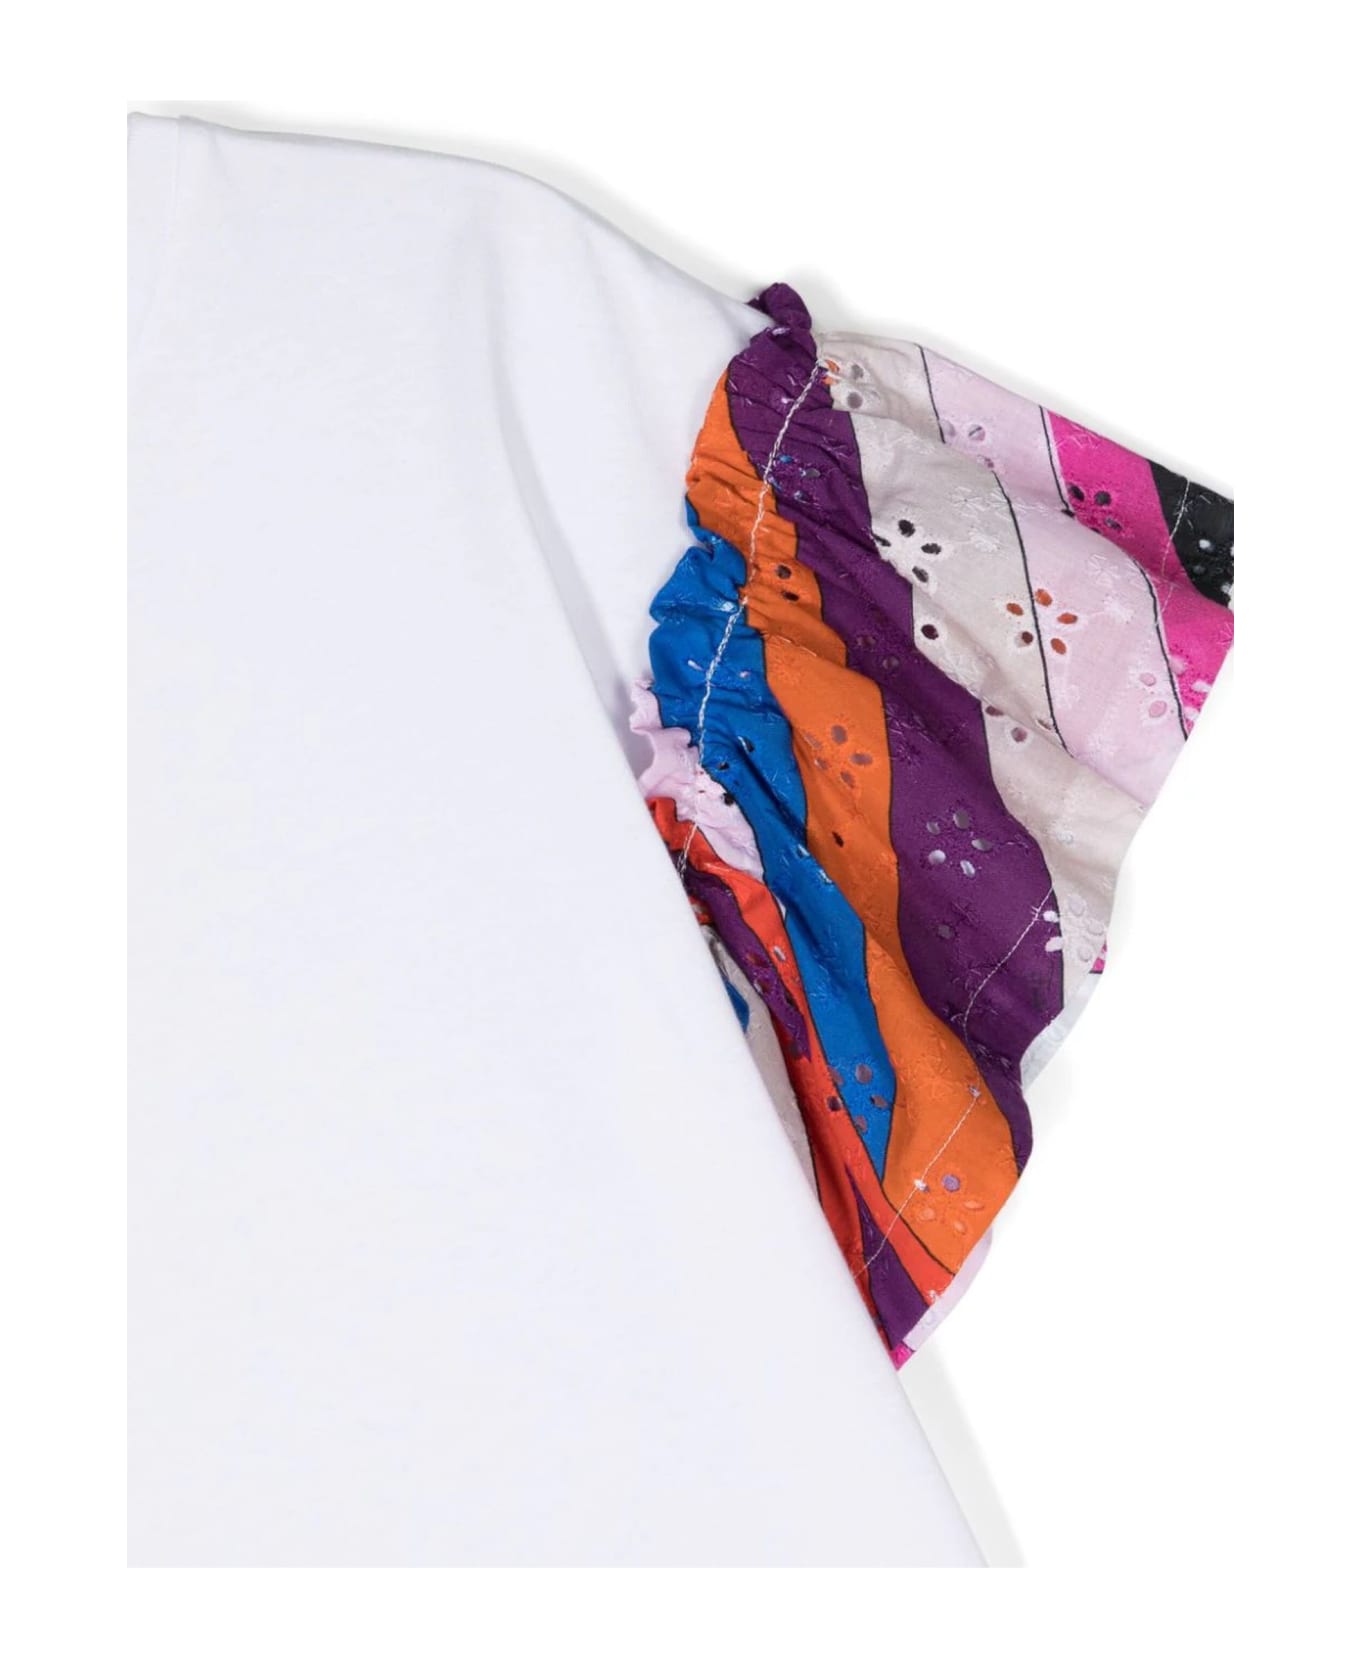 Pucci Emilio Pucci T-shirts And Polos White - White Tシャツ＆ポロシャツ